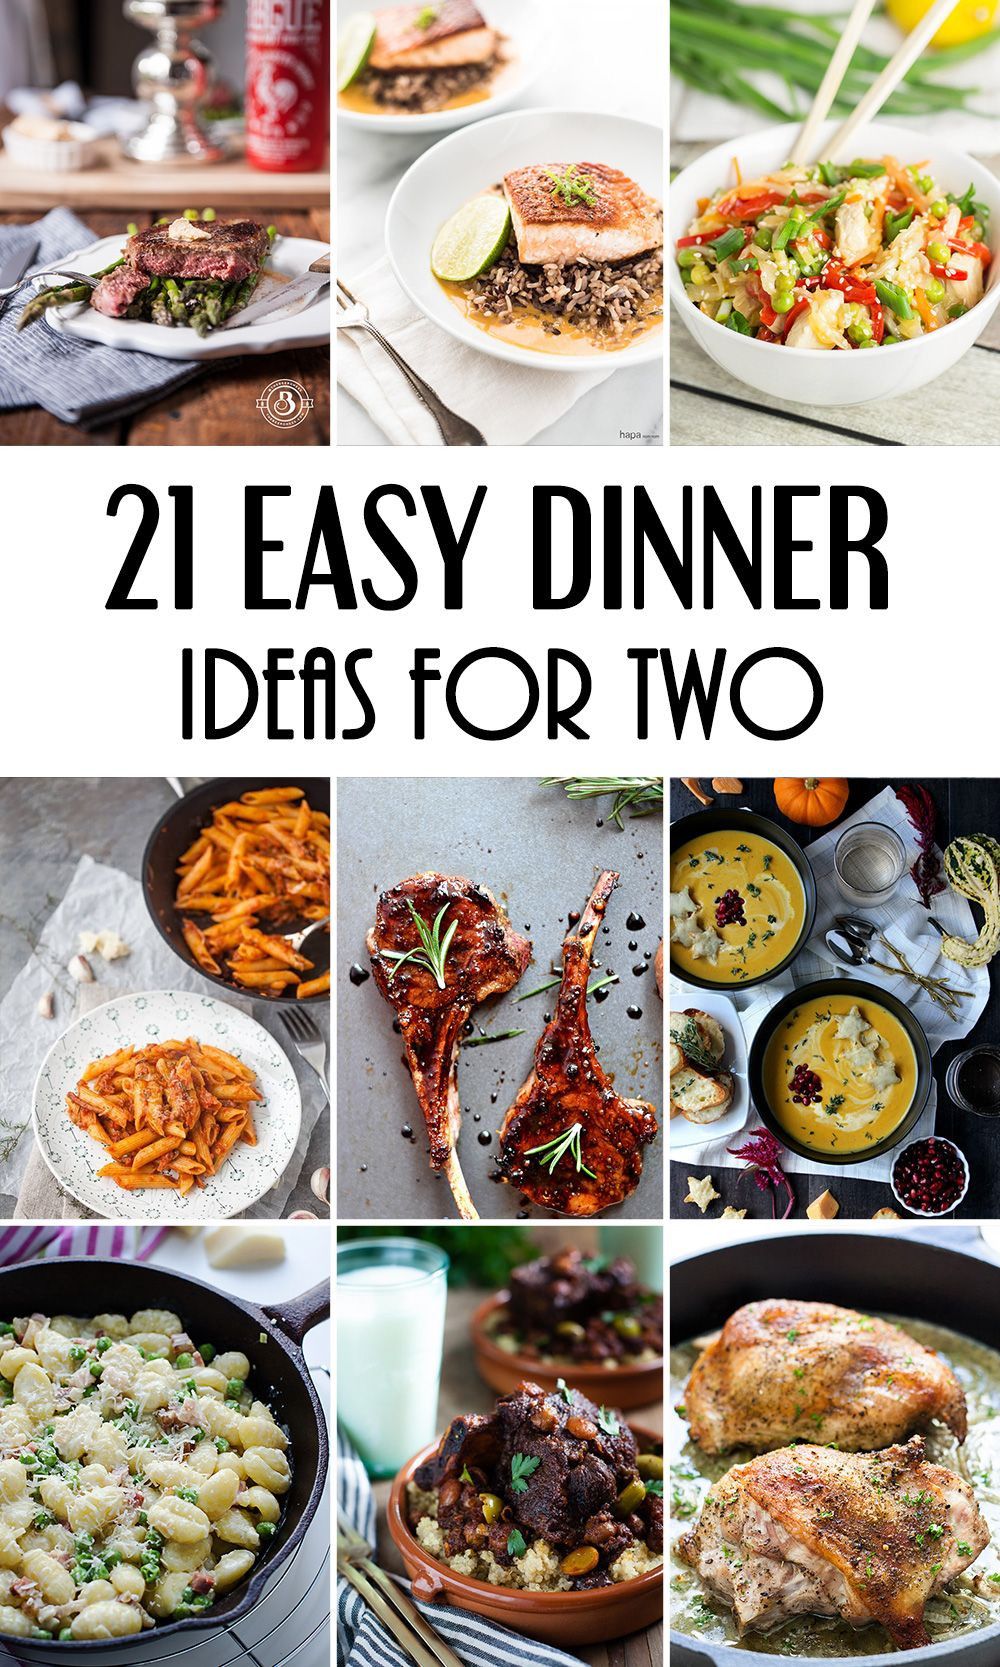 Easy Dinner Recipes For Two Simple Weeknight Meals
 21 Easy Dinner Ideas For Two That Will Impress Your Loved